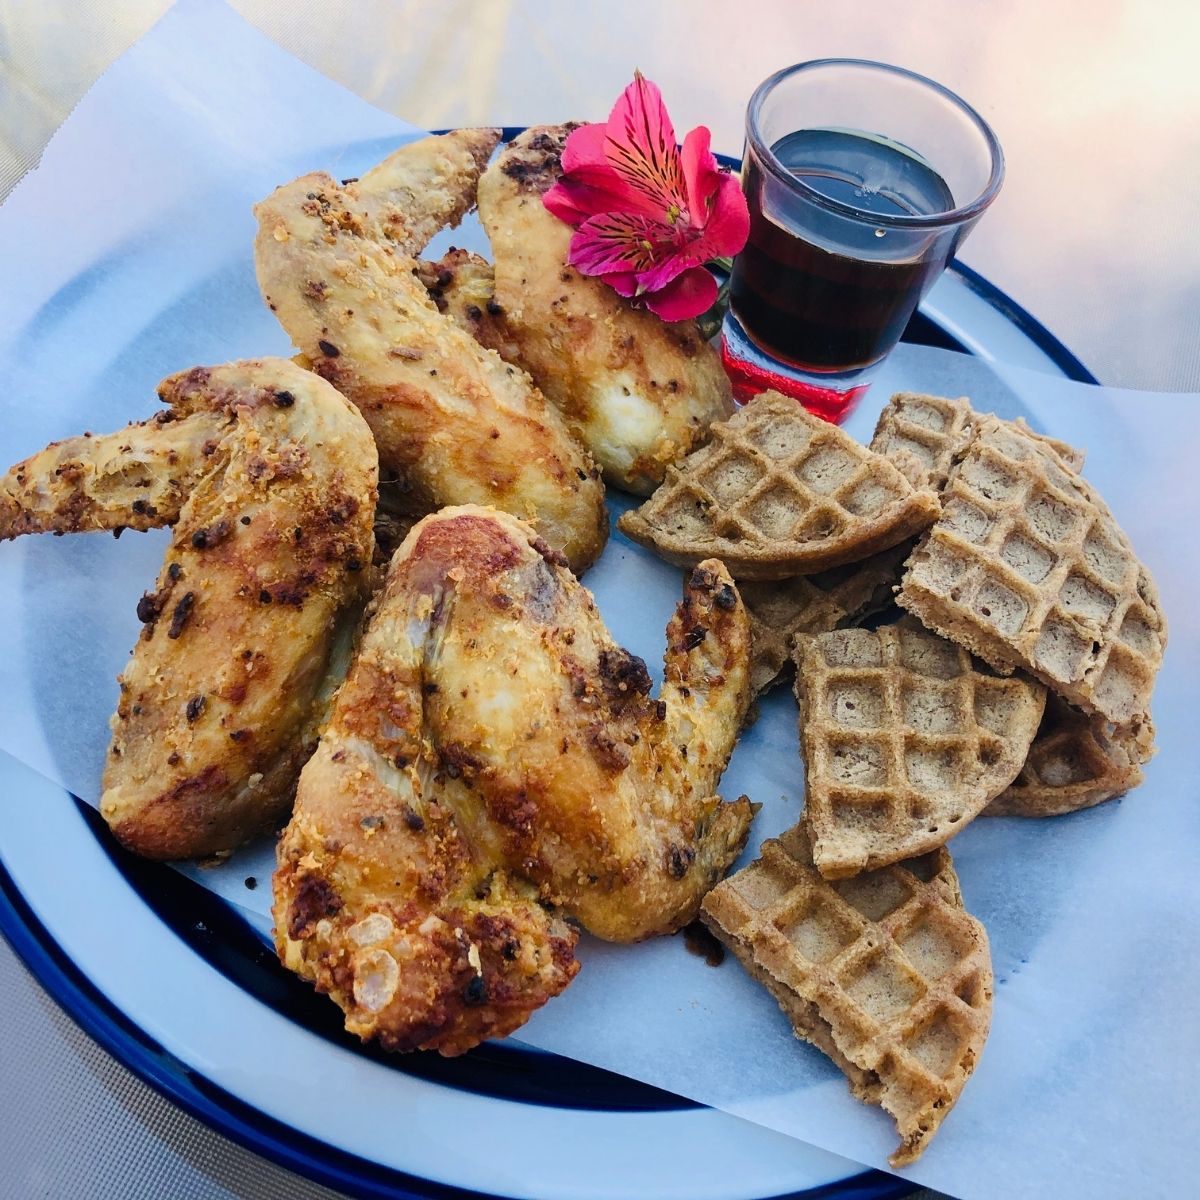 Air Fried chicken wings and waffles on a sheet of parchment paper on a plate with a side of syrup and a pink flower